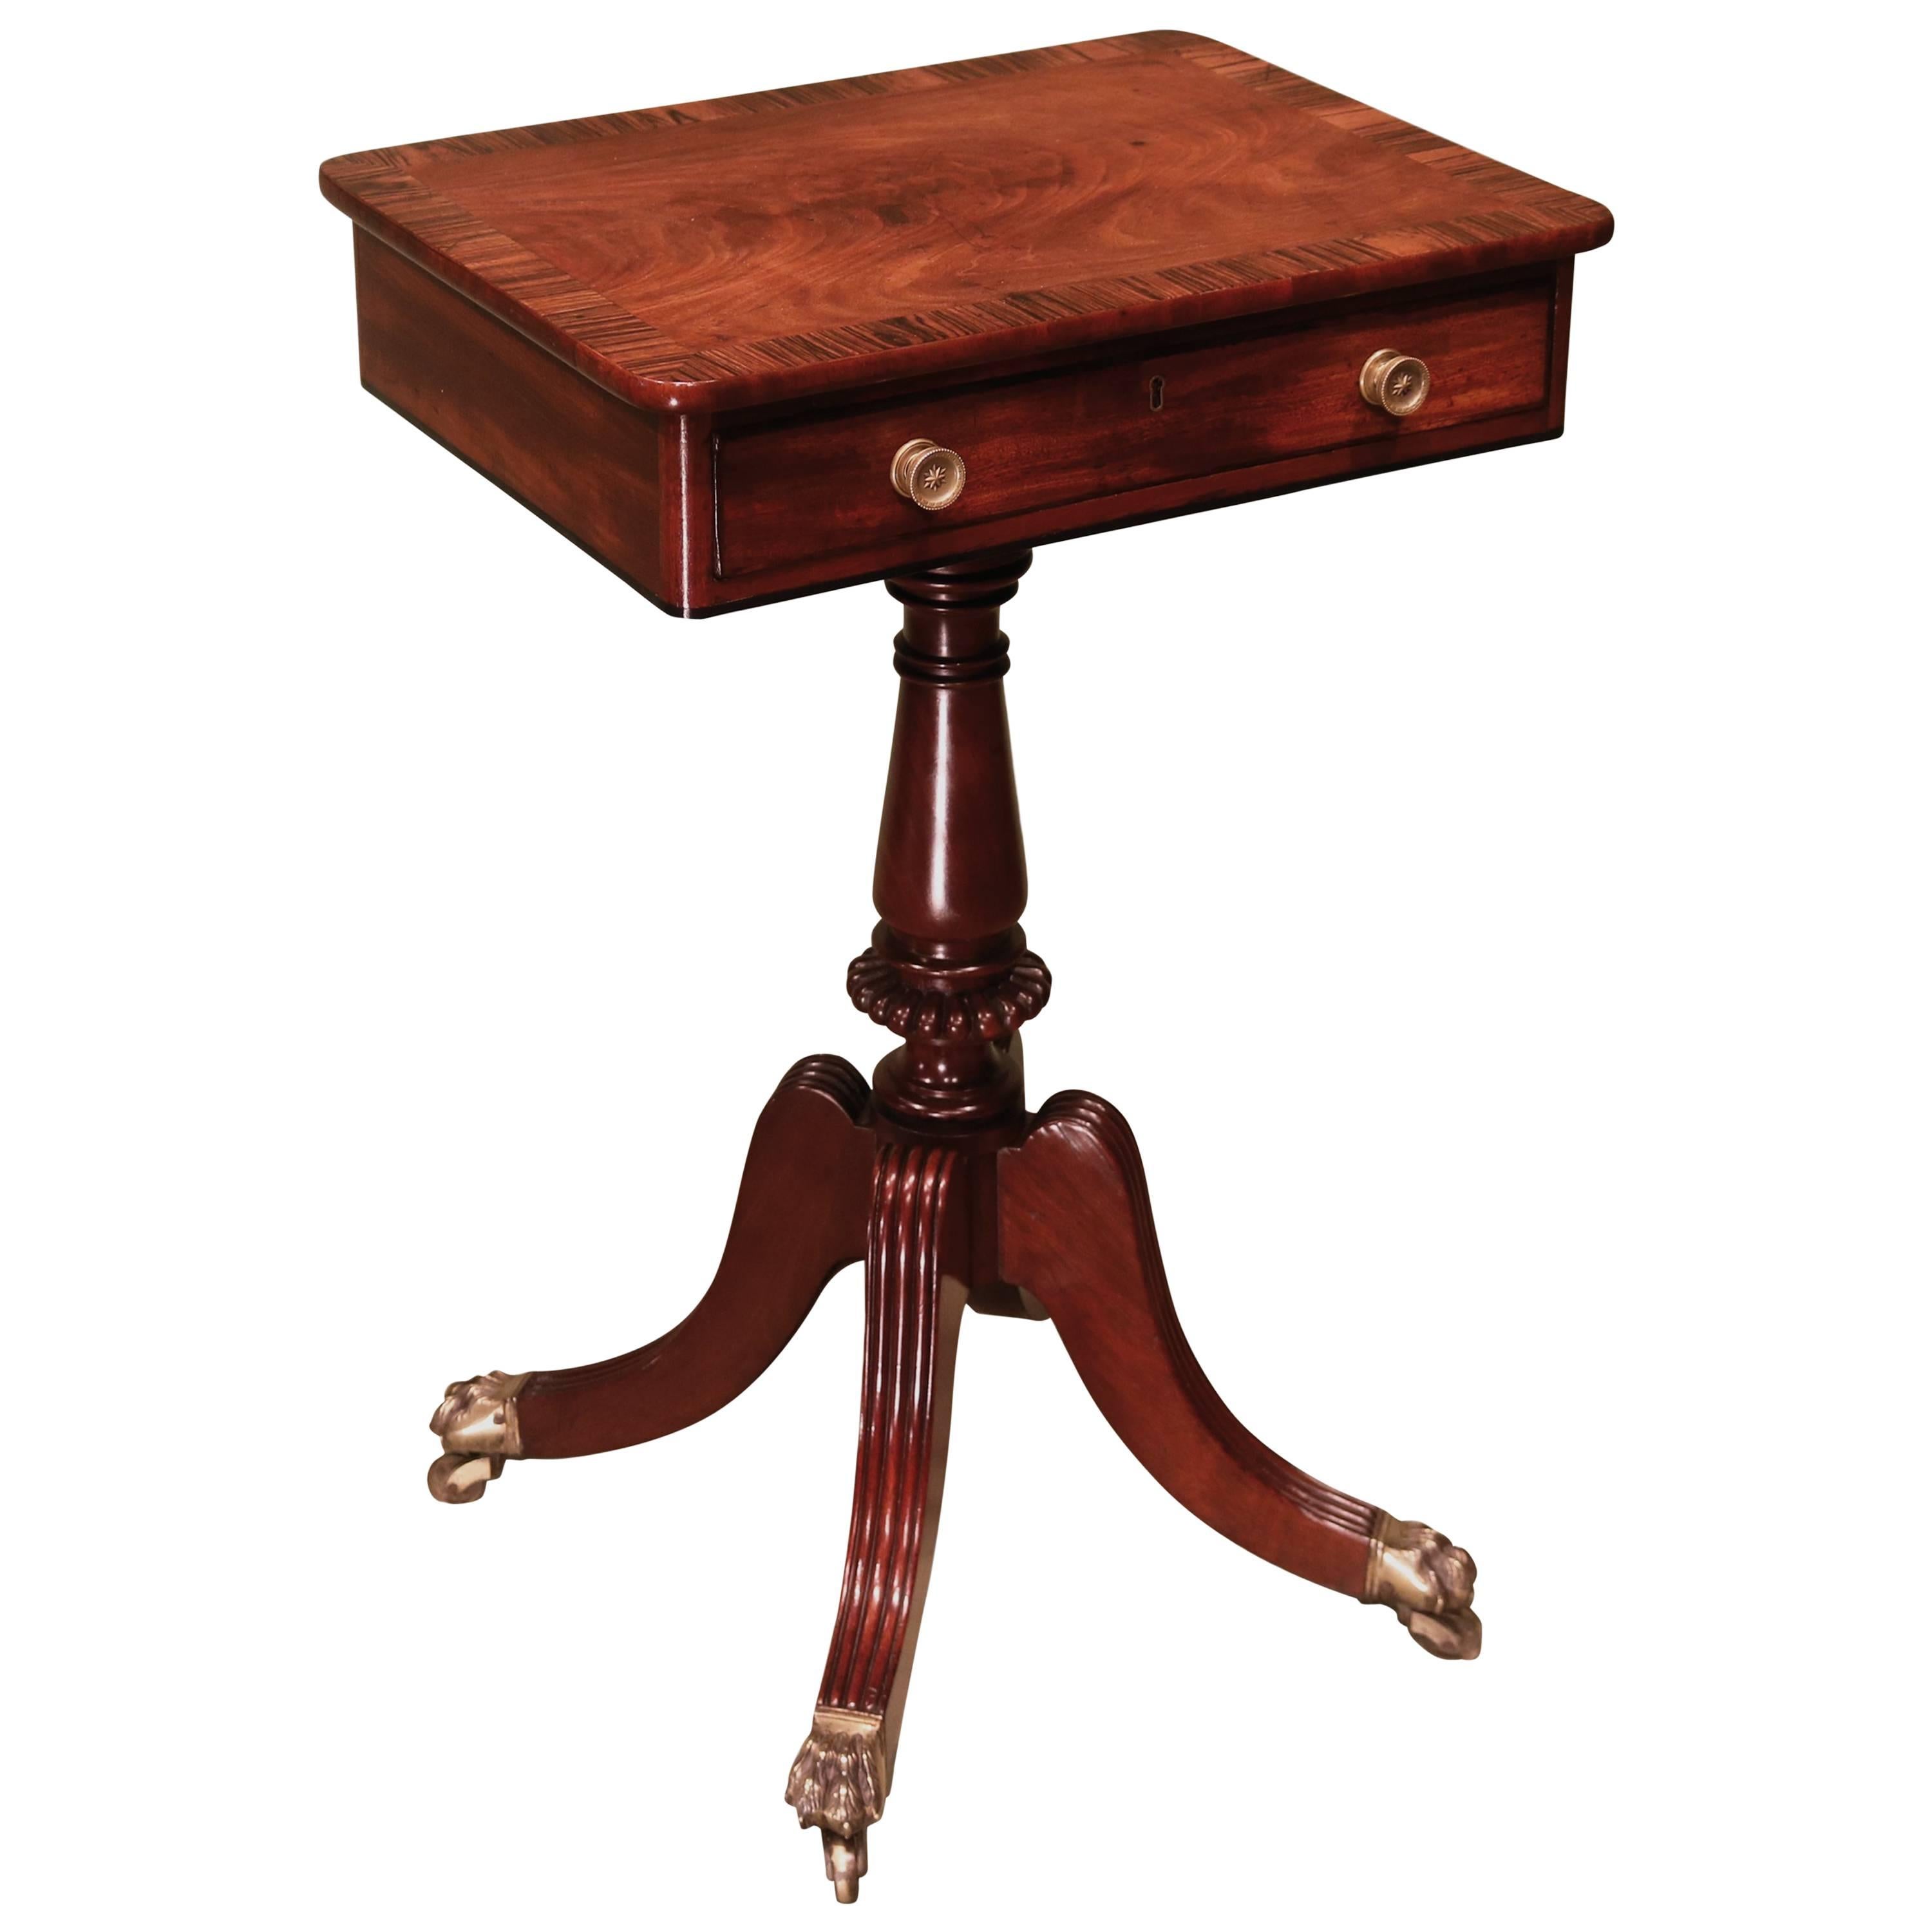 19th Century Regency Rosewood Occasional Table